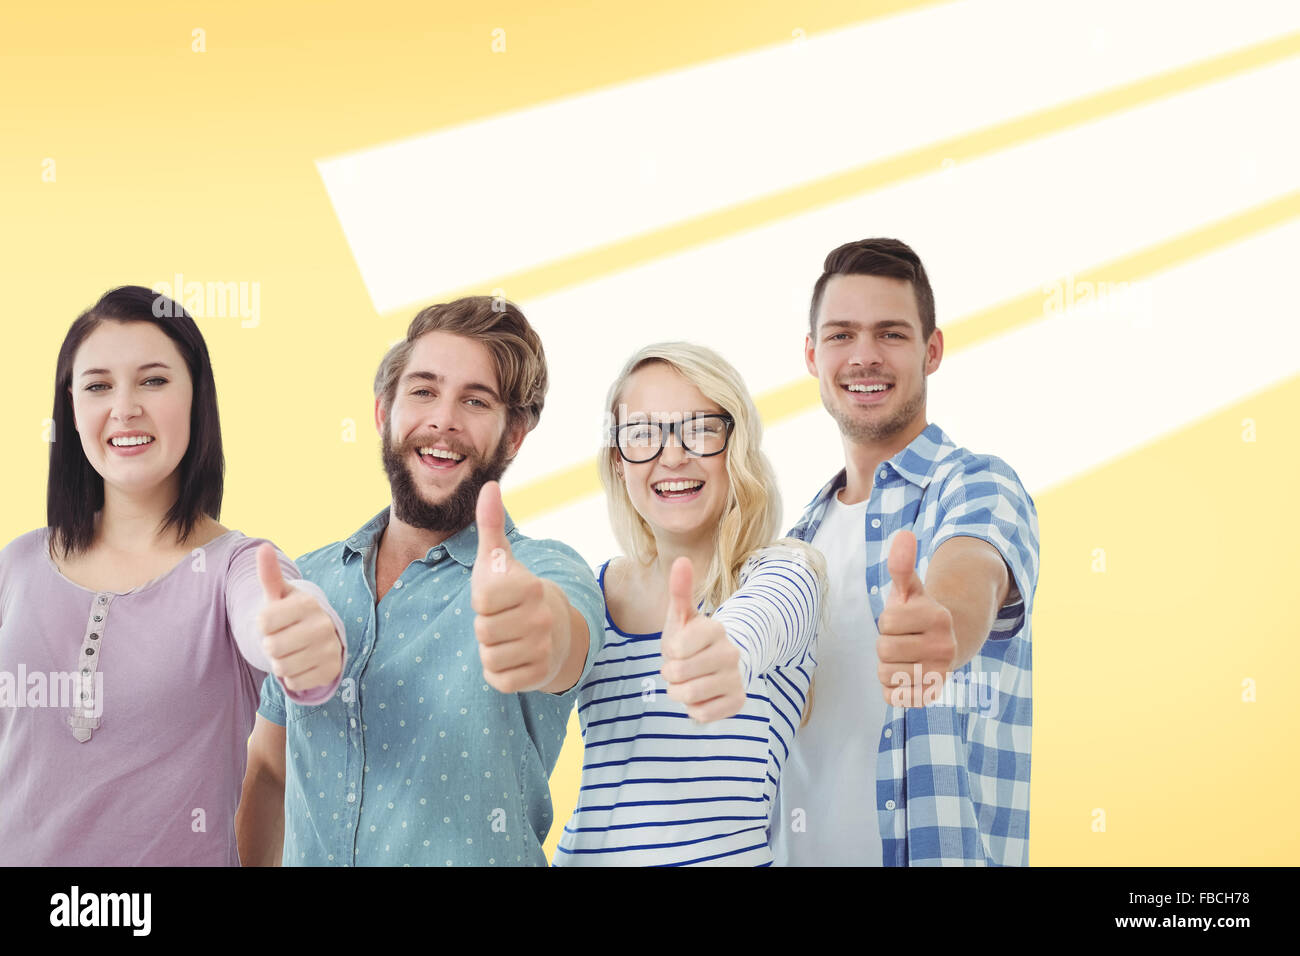 Composite image of portrait of cheerful business people with thumbs up Stock Photo